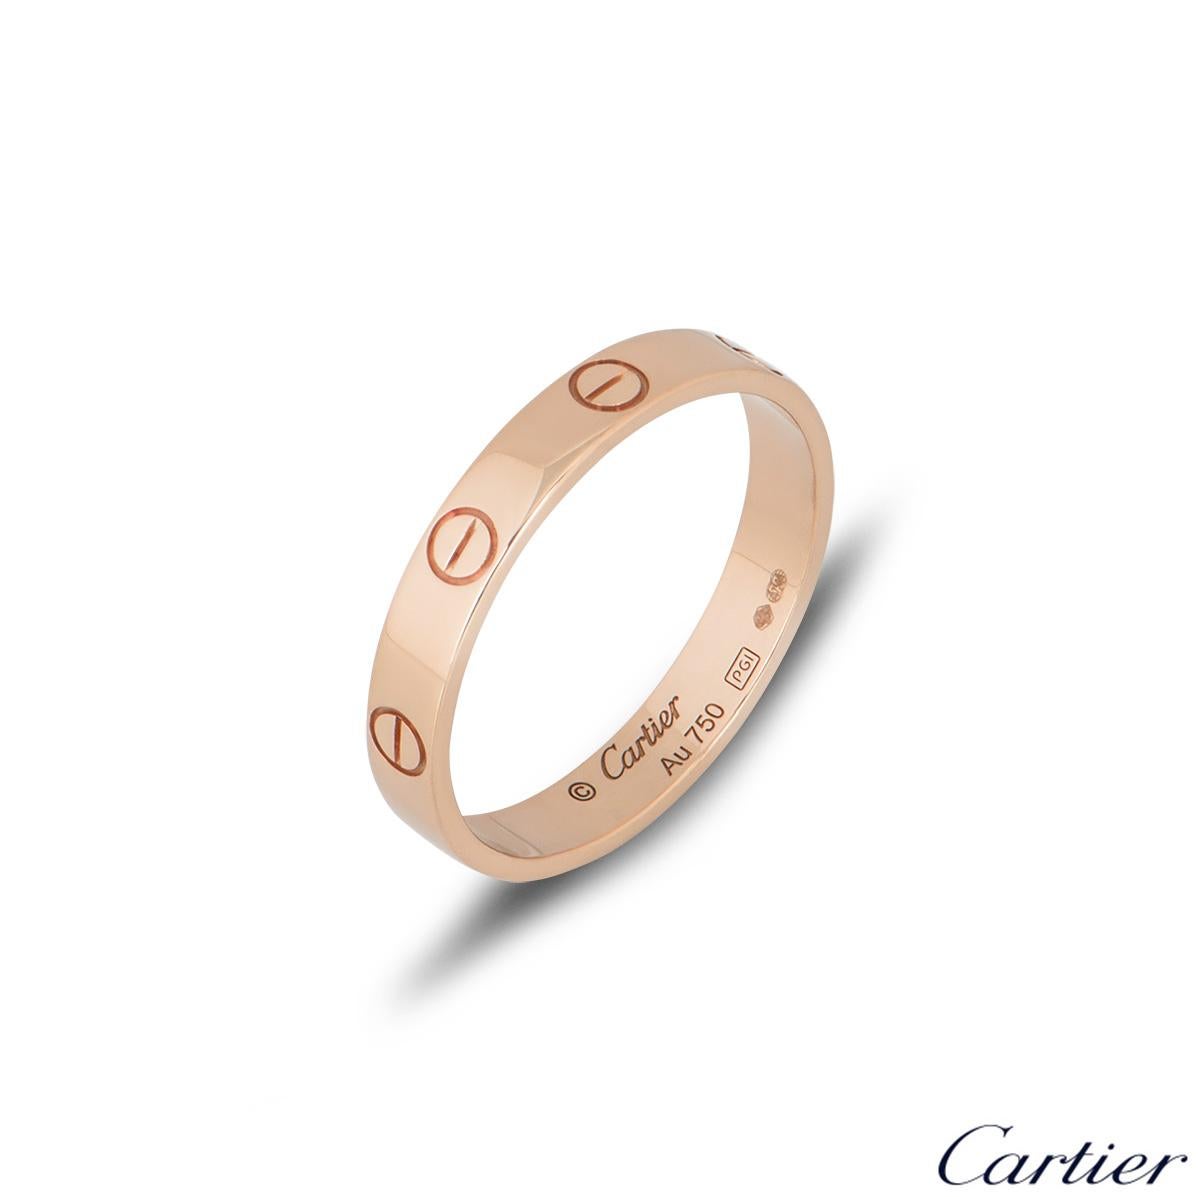 An 18k rose gold Cartier wedding band ring from the Love collection. The ring comprises of the iconic screw motifs on the outer edge of the band. The 3.5mm ring is a size 53 and has a gross weight of 3.20 grams.

The ring comes complete with a